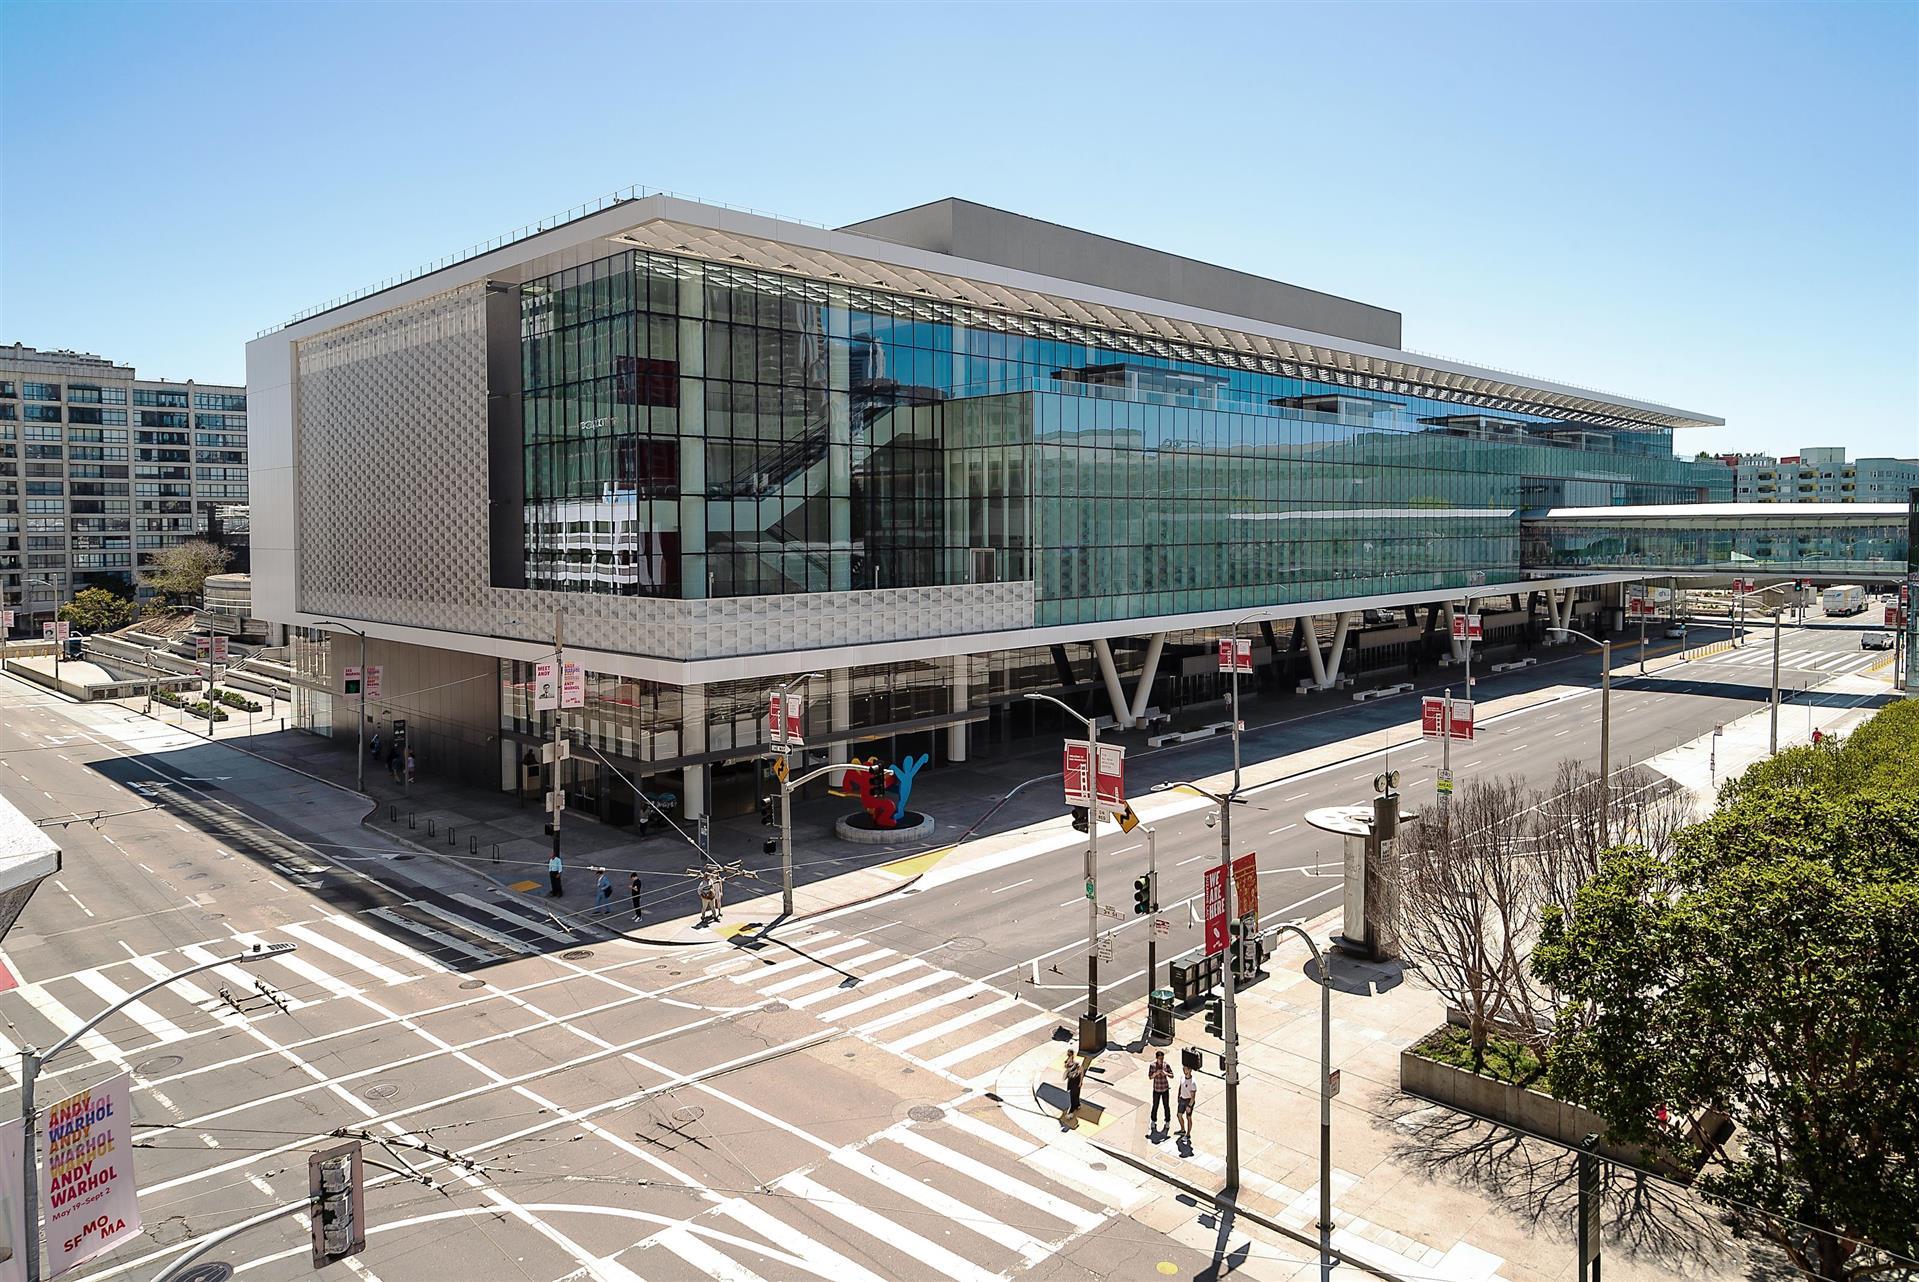 The Moscone Center in San Francisco, CA